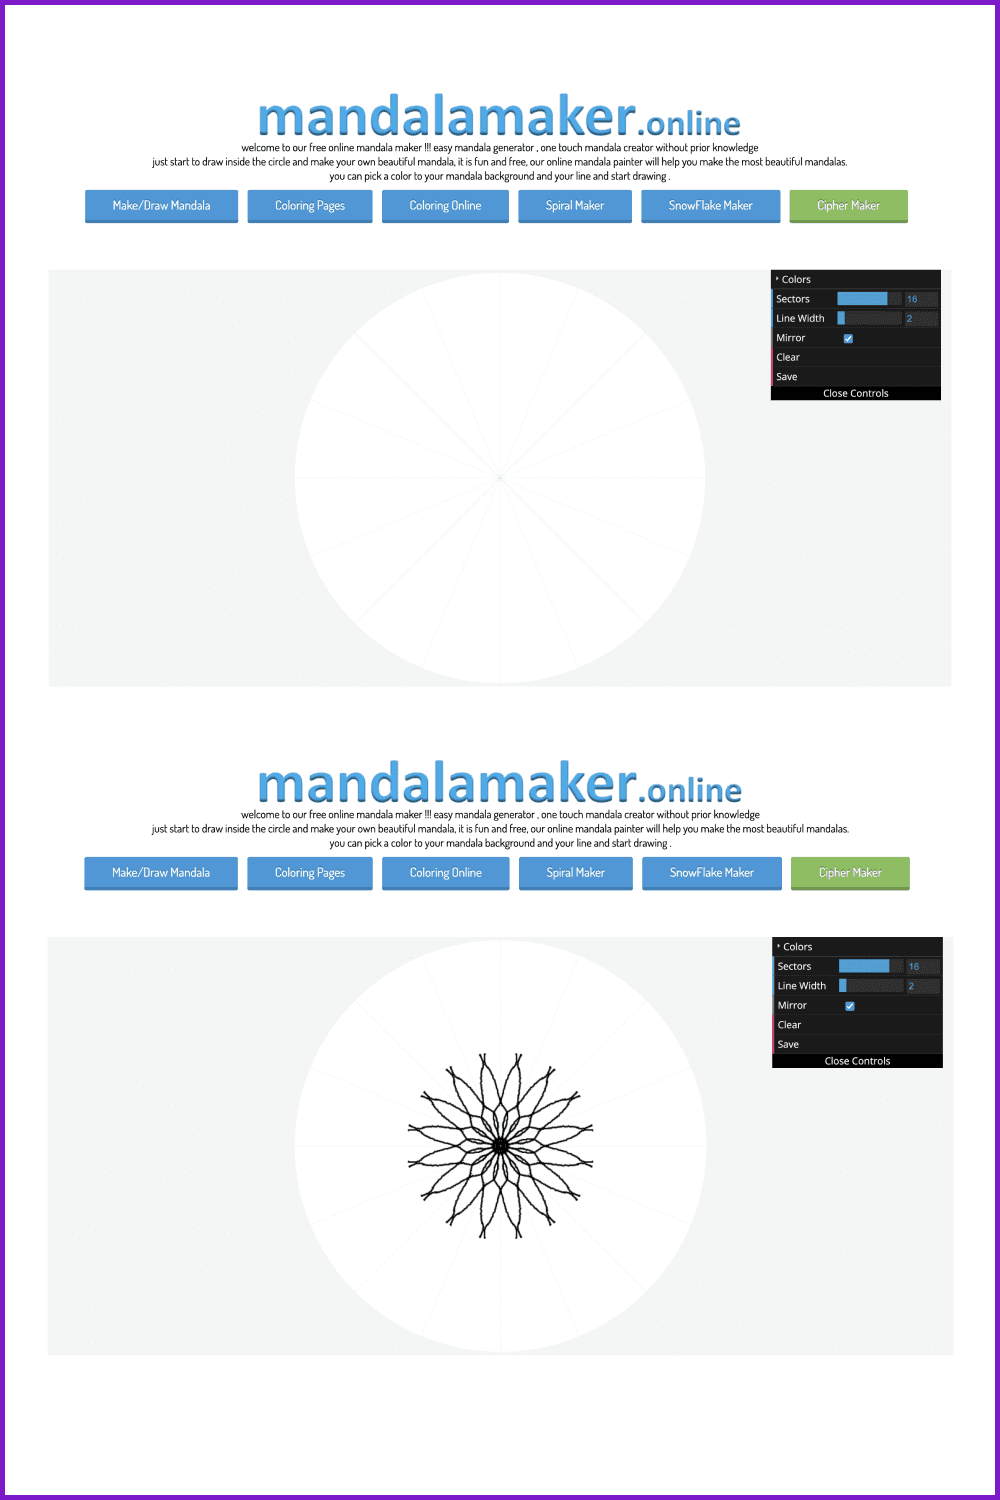 You can create online any version of the mandala, even according to your design.